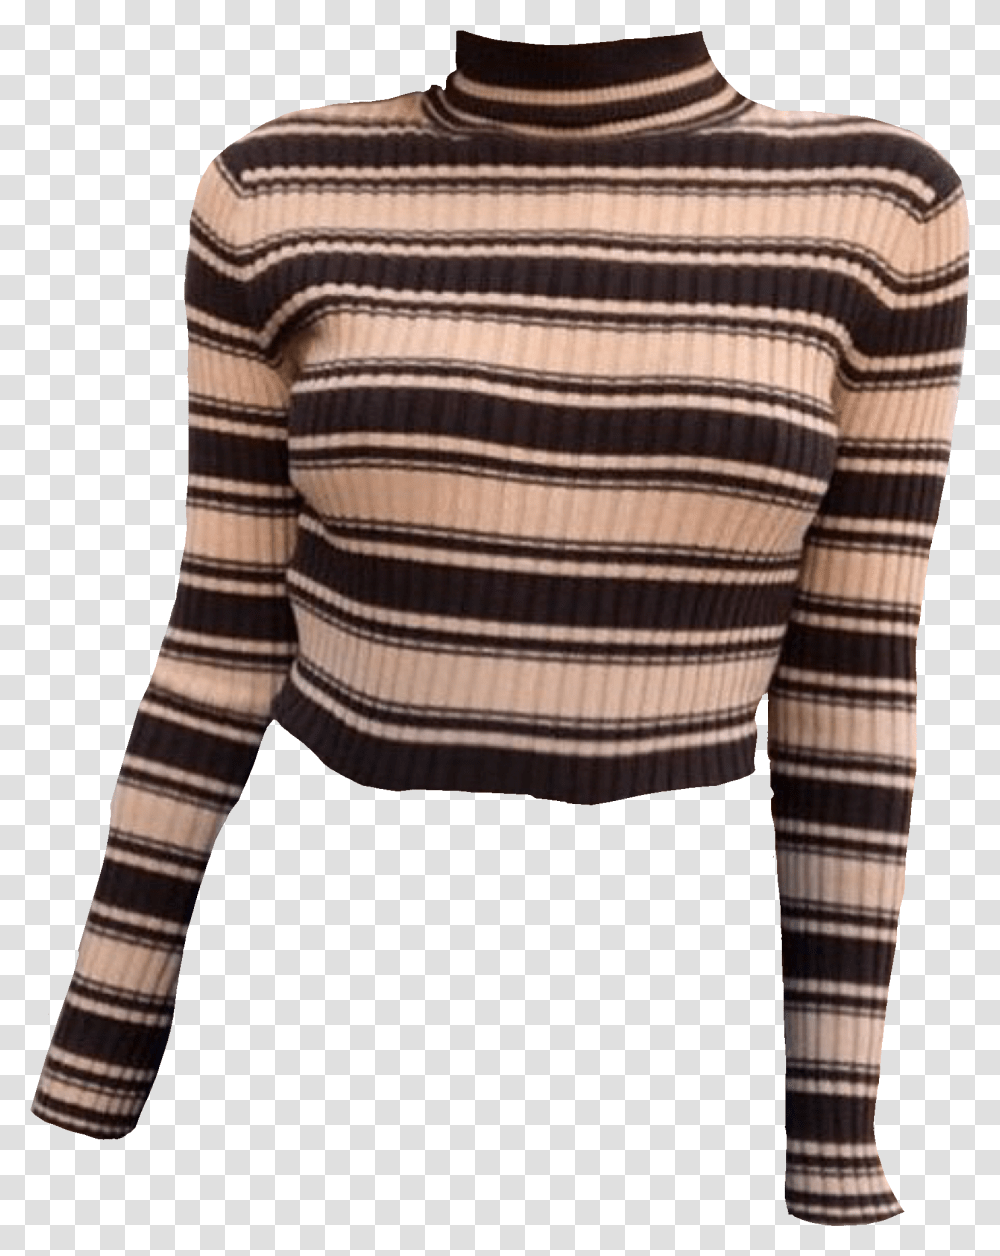 Edpng Theymakemoodboards Instagram Sweater Niche Meme Clothes, Clothing, Apparel, Sleeve, Chair Transparent Png